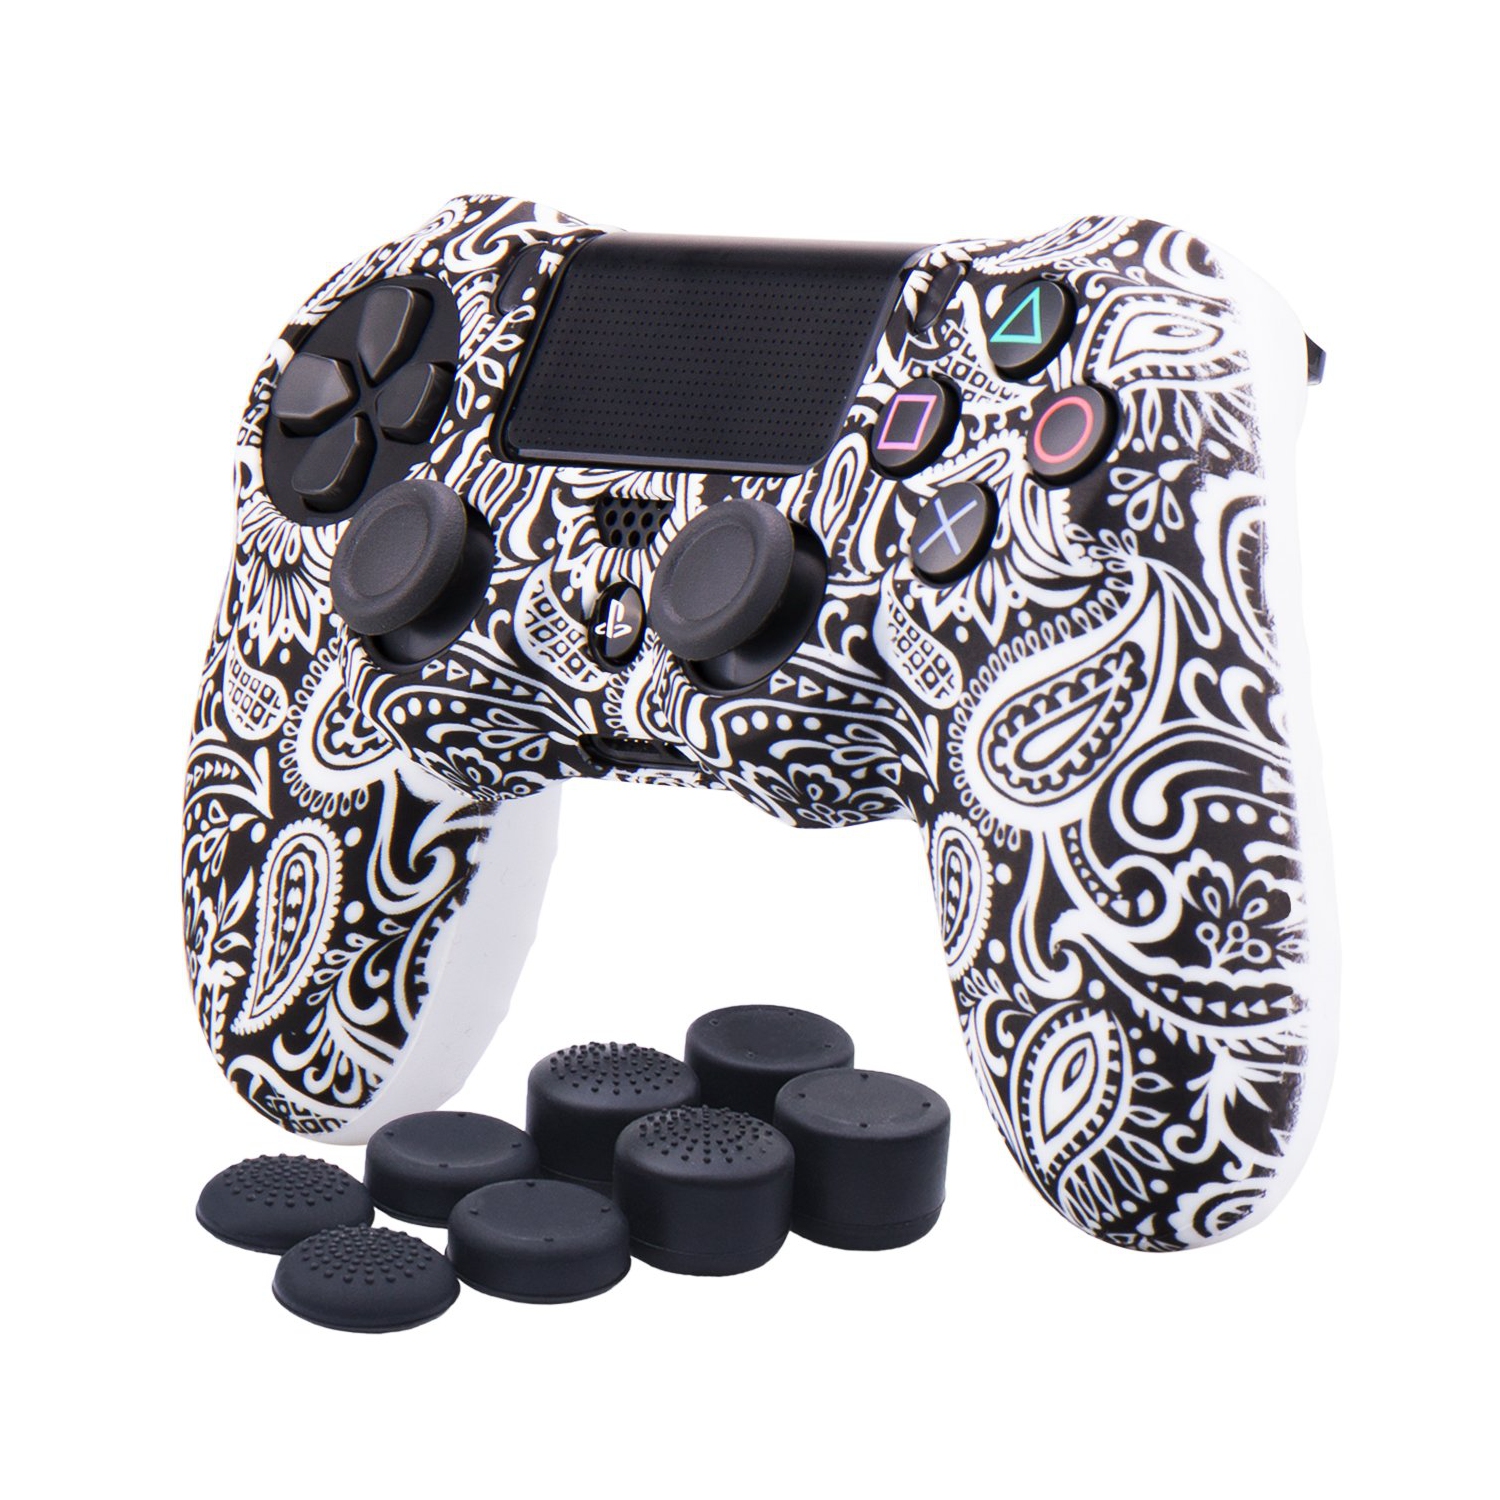 YoRHa Water Transfer Printing Flowers Silicone Cover Skin Case for Sony PS4/slim/Pro Dualshock 4 controller x 1(white) With P